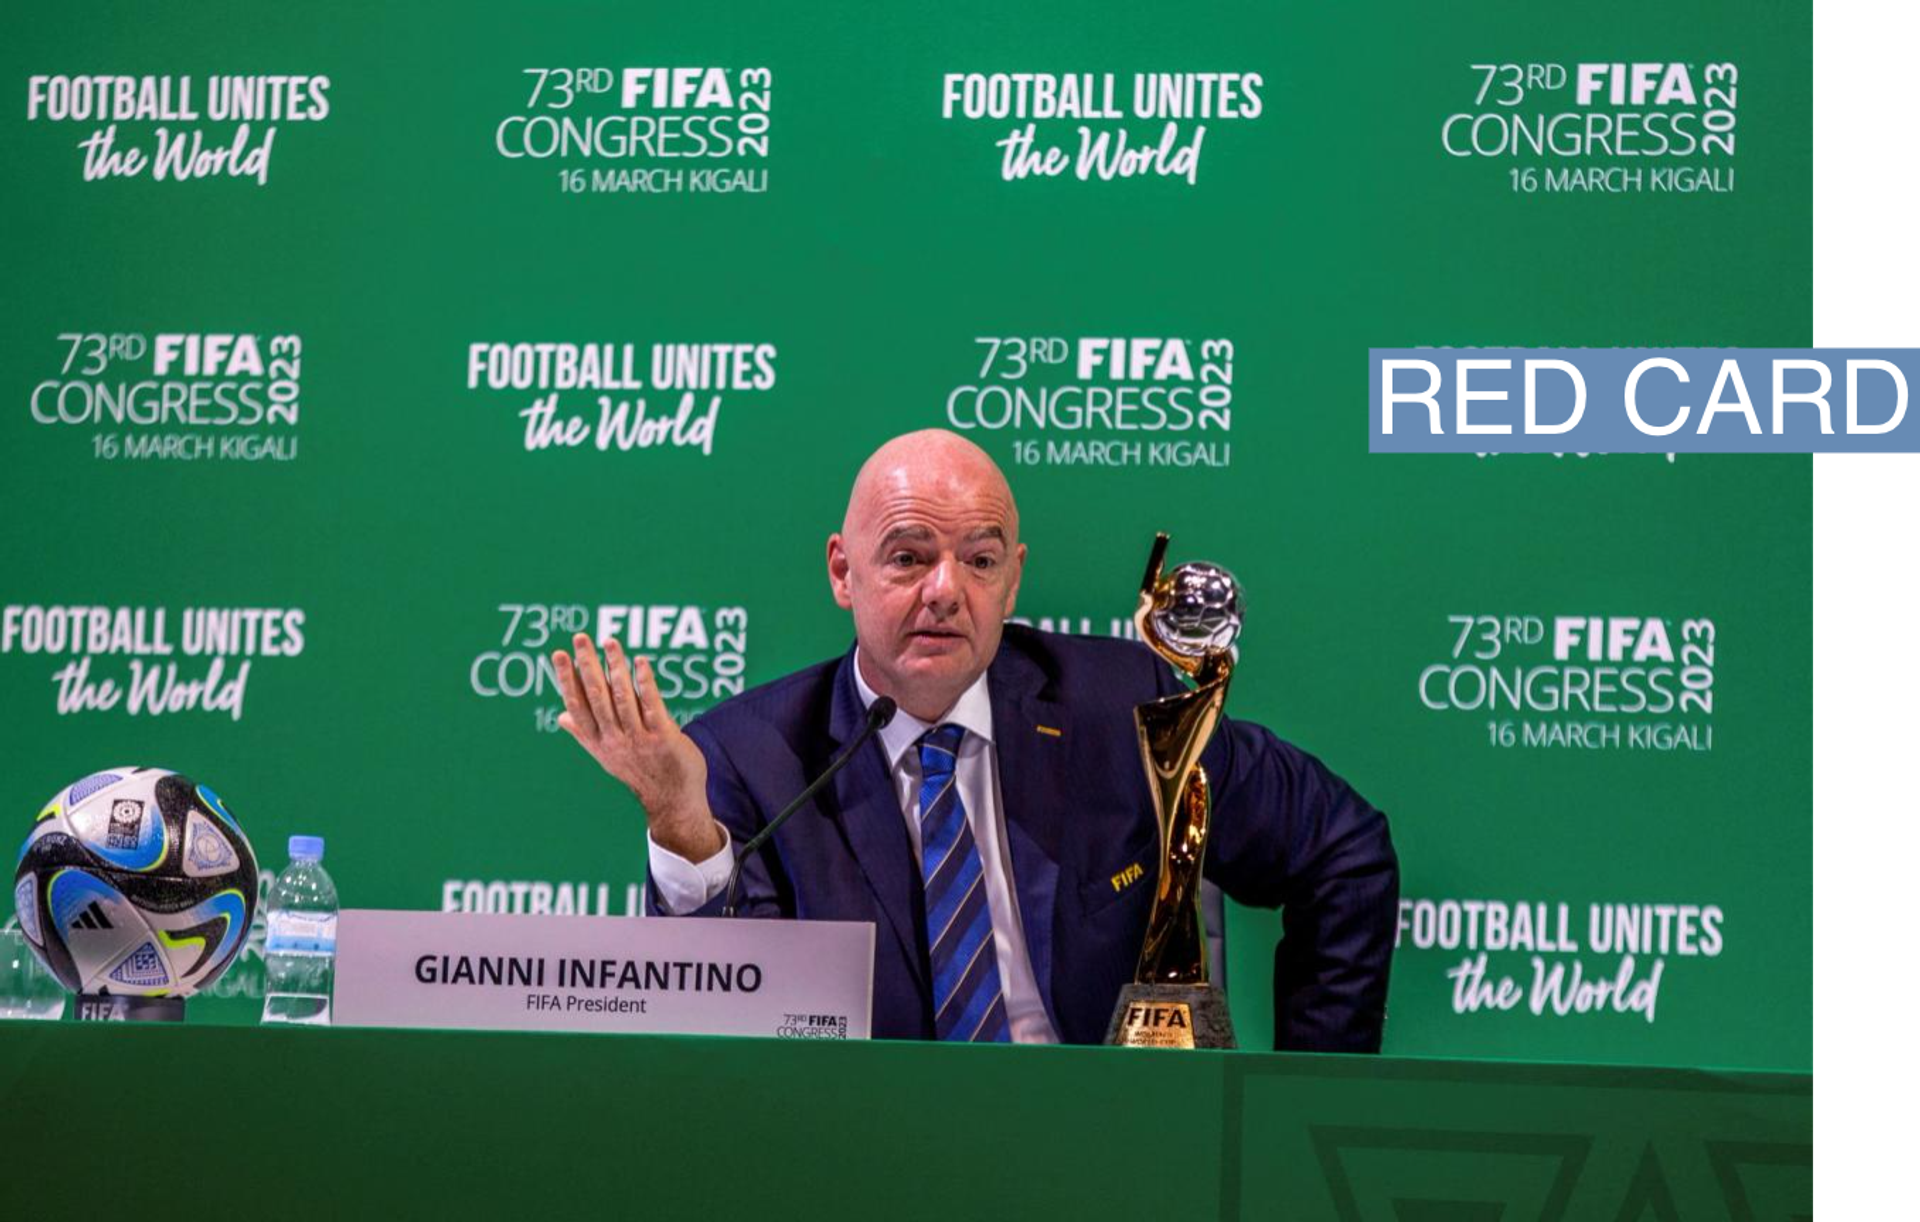 FIFA President Gianni speaks at a news conference following the 73rd FIFA Congress at the BK Arena in Kigali, Rwanda March 16, 2023.